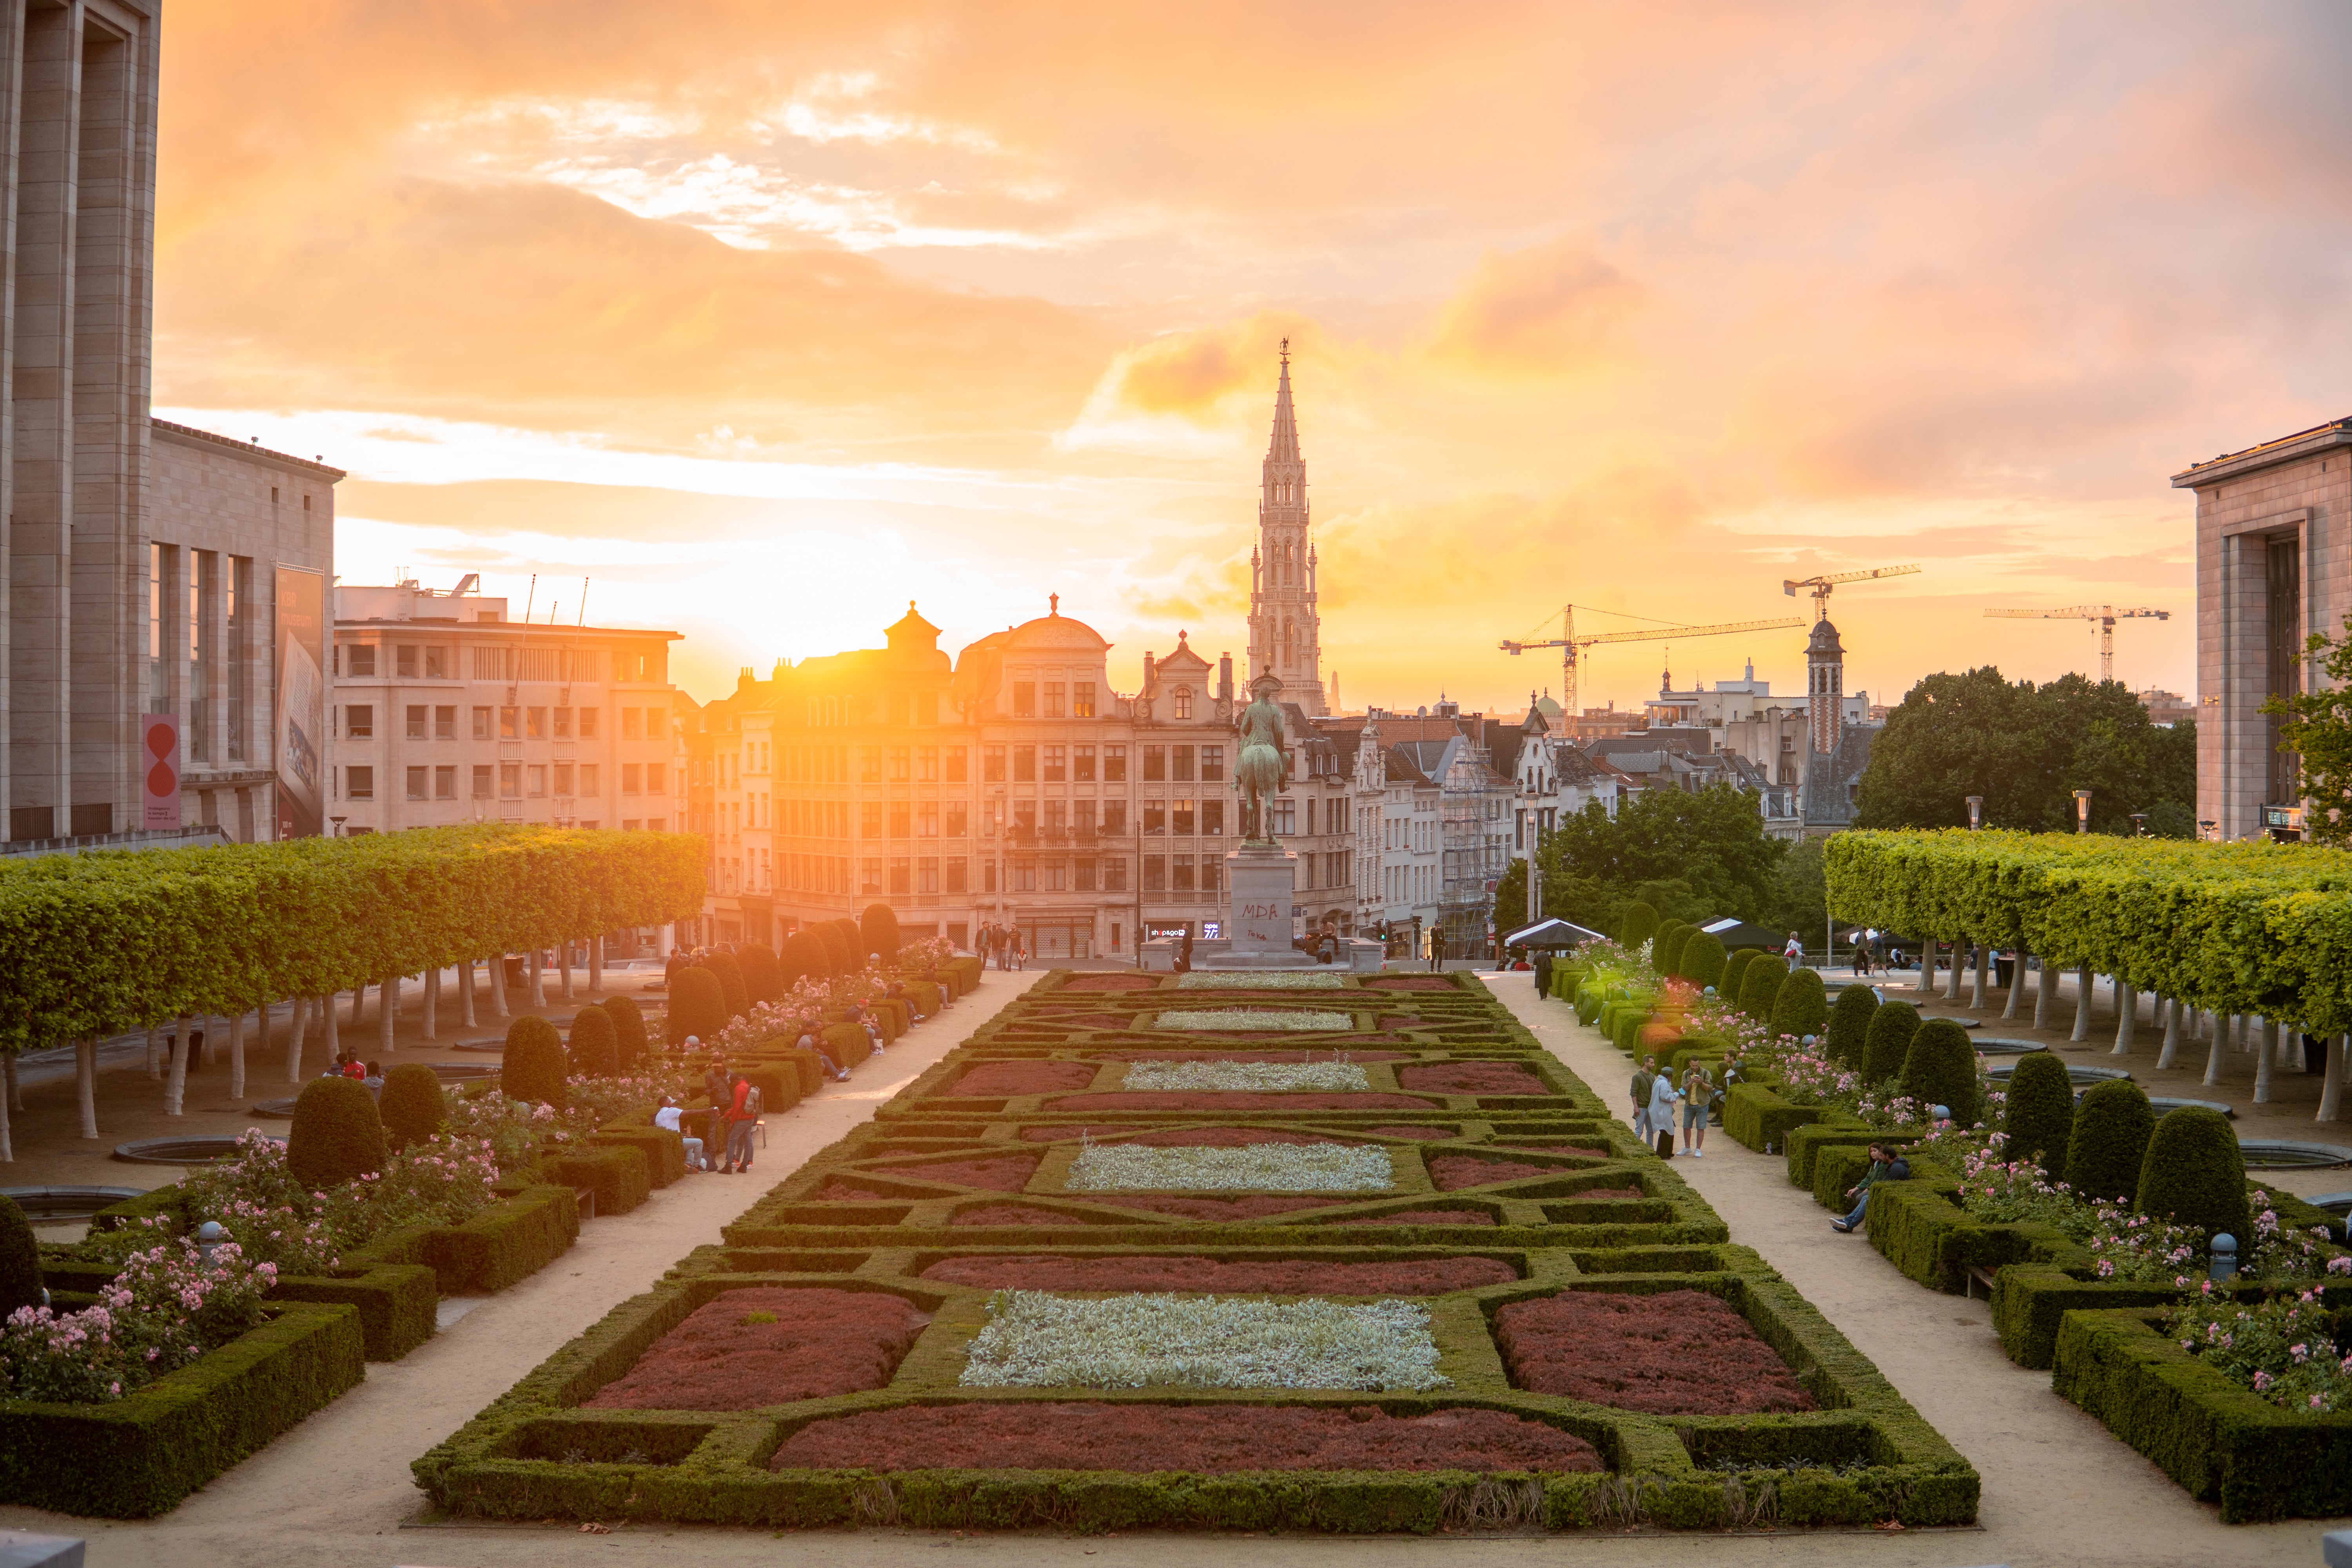 Brussels Kings Place during sunset